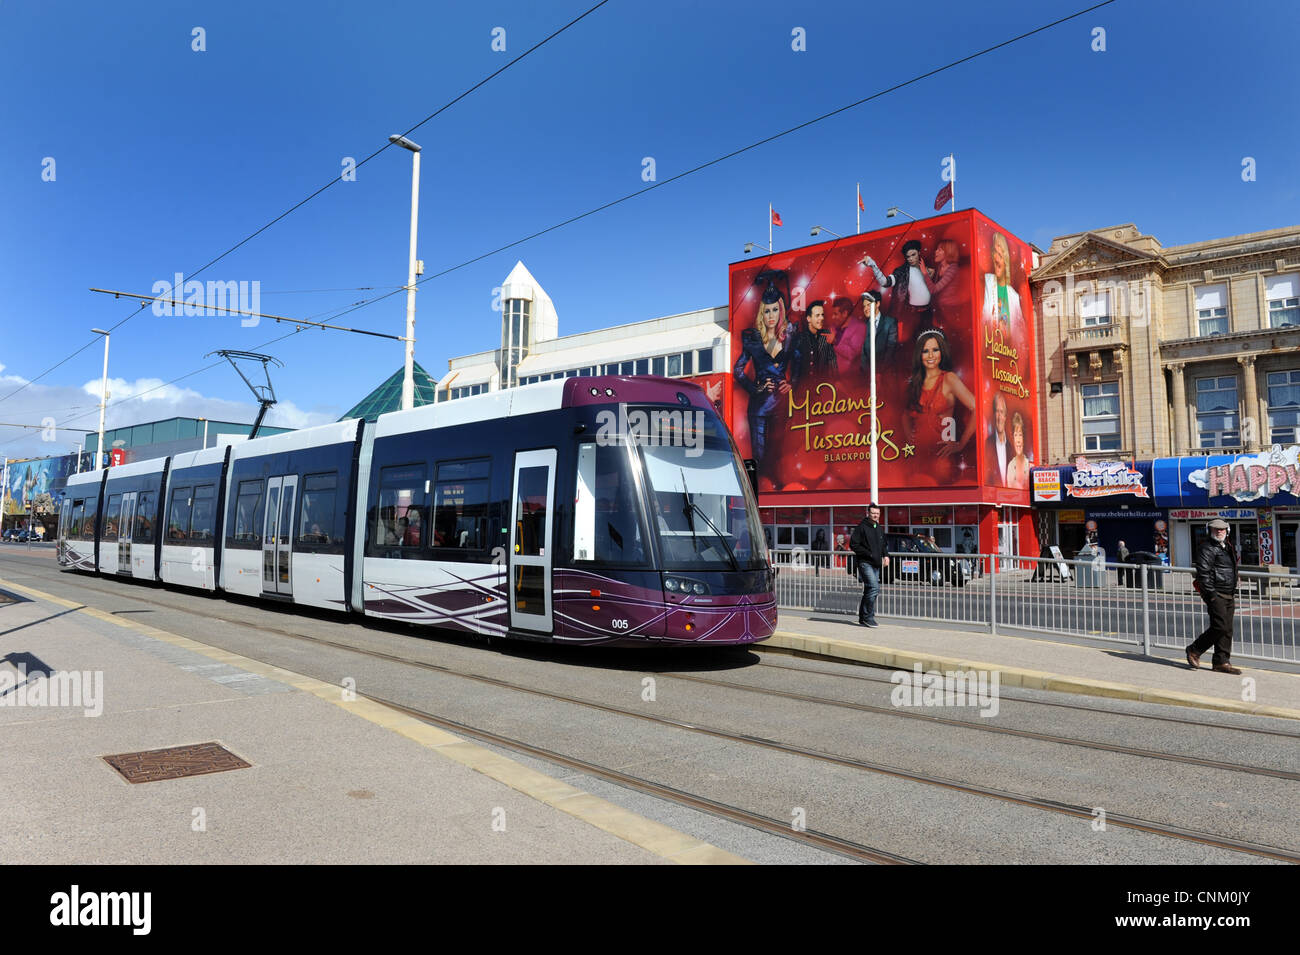 A new Blackpool tram at Central Pier Station in Blackpool Uk the new Bombardier trams went into service April 2012 Stock Photo